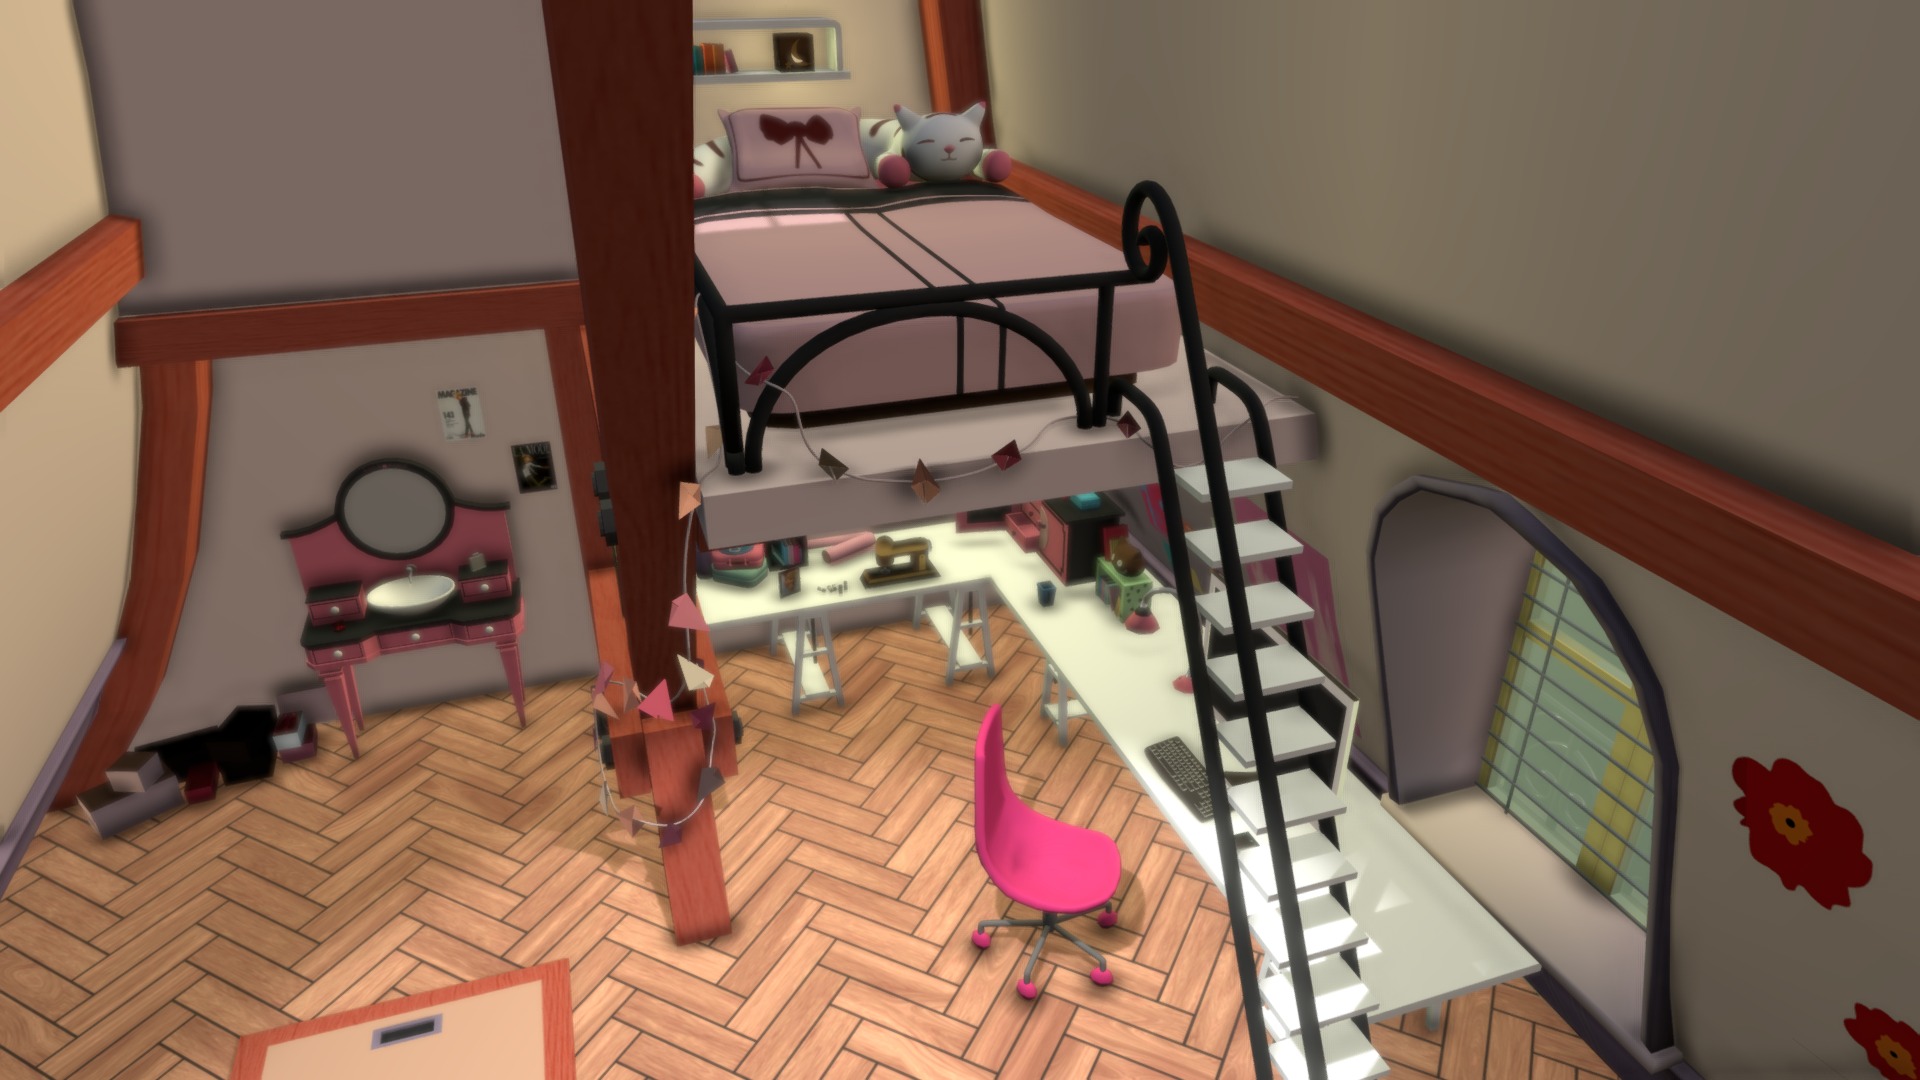 3D model Room Marinette Miraculous Ladybug - This is a 3D model of the Room Marinette Miraculous Ladybug. The 3D model is about a room with a bed and a table.